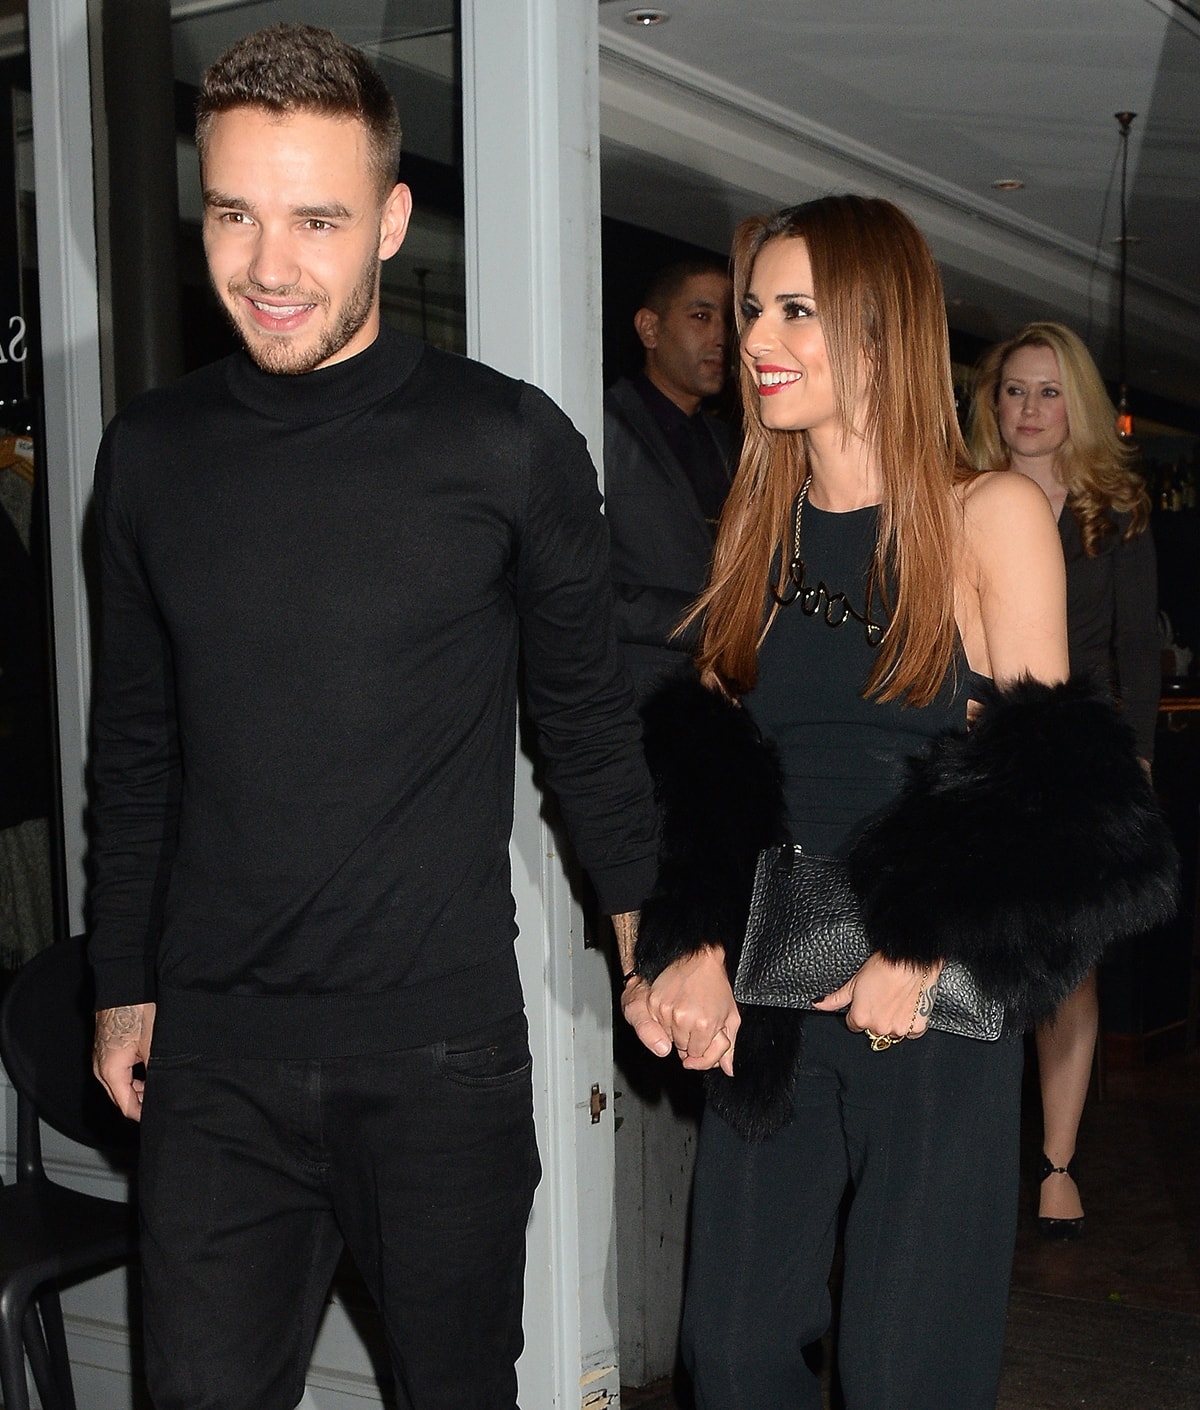 Cheryl and Liam went public as a couple in February 2016, welcomed son Bear in March 2017, and split in July 2018